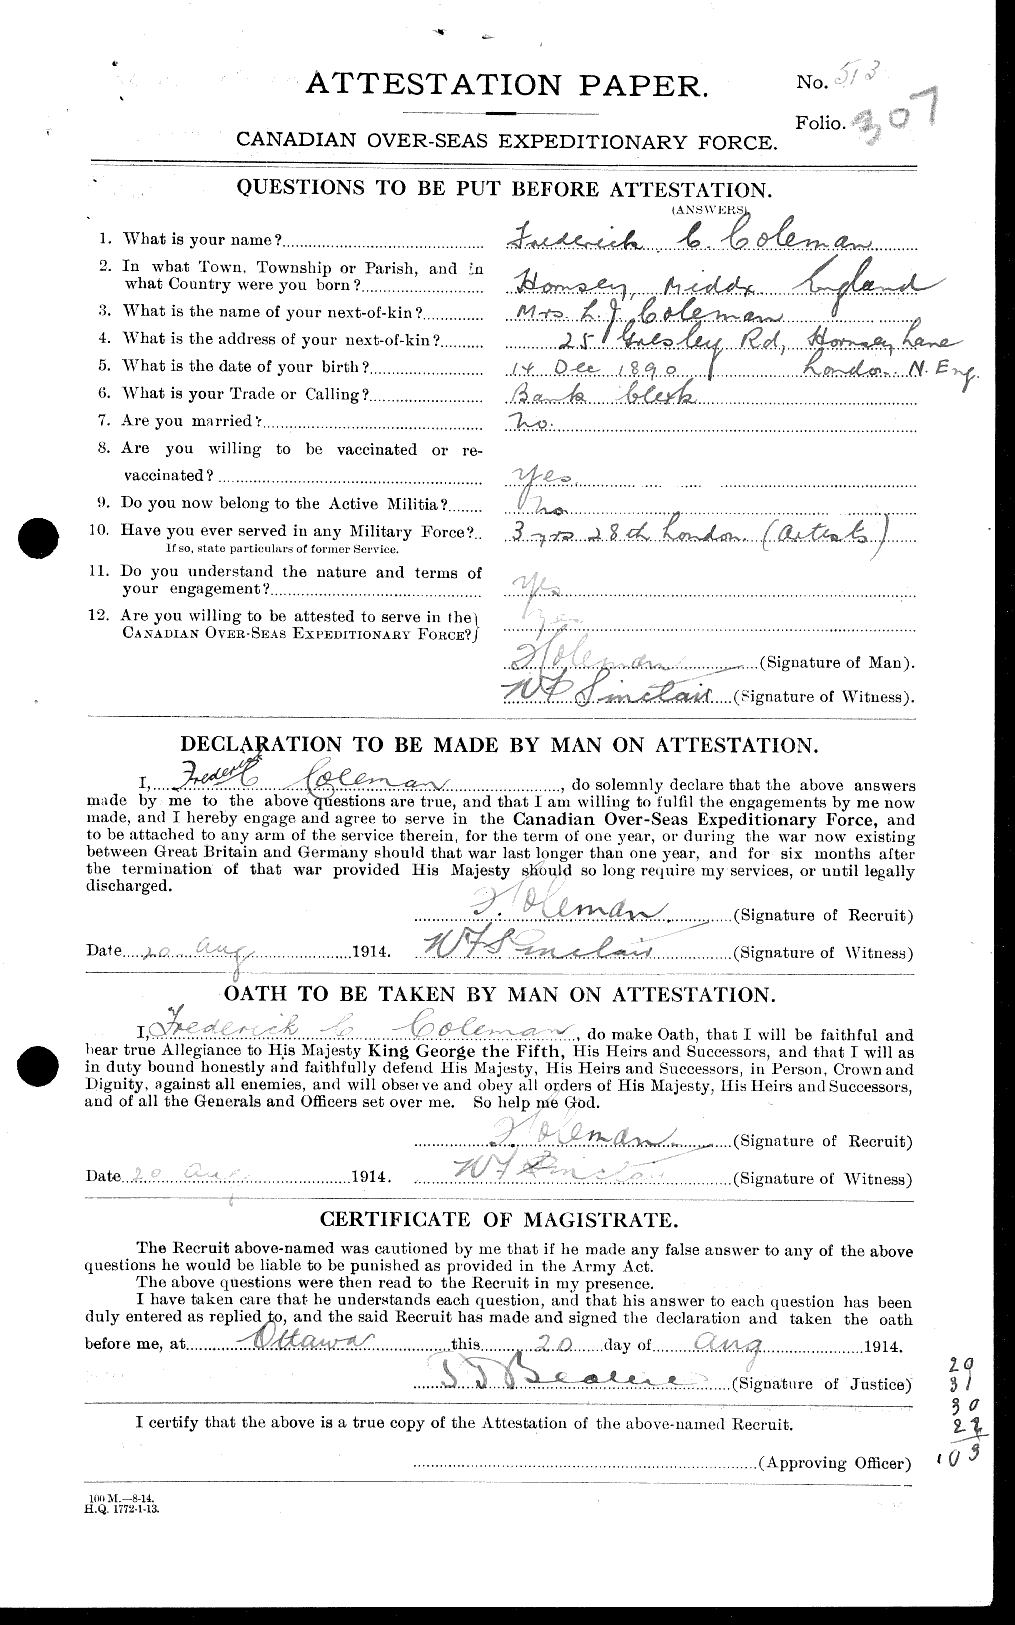 Personnel Records of the First World War - CEF 028137a